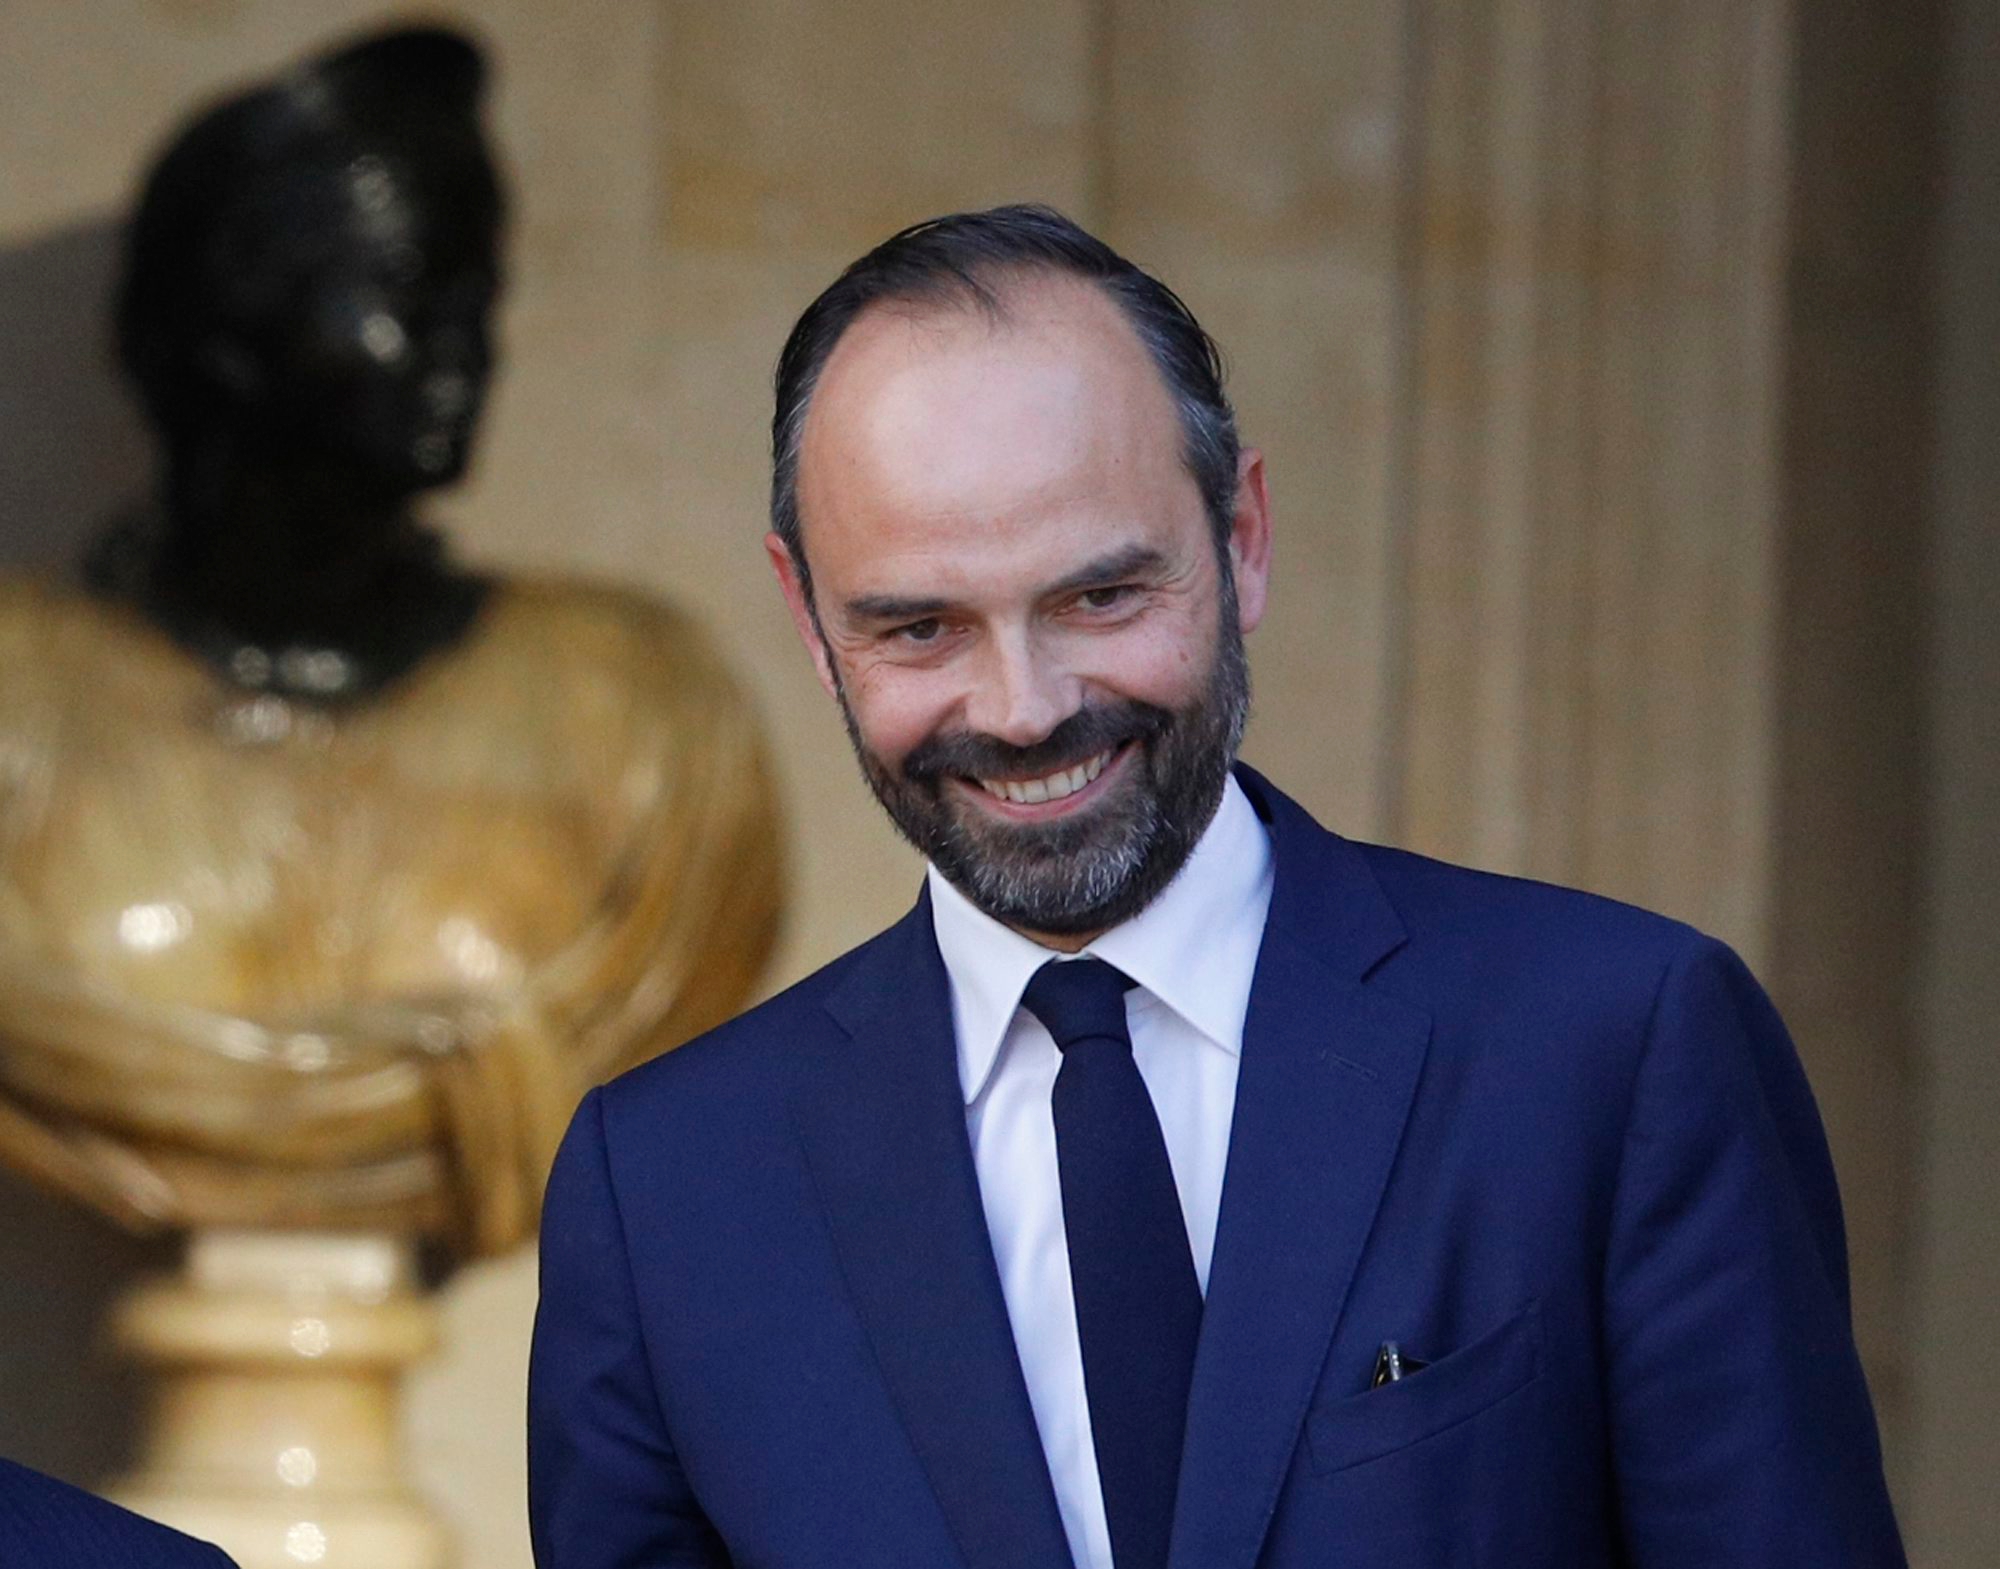 Newly appointed French Prime Minister Edouard Philippe, right, is greeted by outgoing Prime Minister, Bernard Cazeneuve, prior to their meeting in Paris, France, Monday, May 15, 2017. On his first full day in office, French President Emmanuel Macron moved quickly Monday on fronts both foreign and domestic, naming 46-year-old lawmaker Edouard Philippe as his new prime minister before flying off to Berlin for talks with Chancellor Angela Merkel. (AP Photo/Kamil Zihnioglu) France President